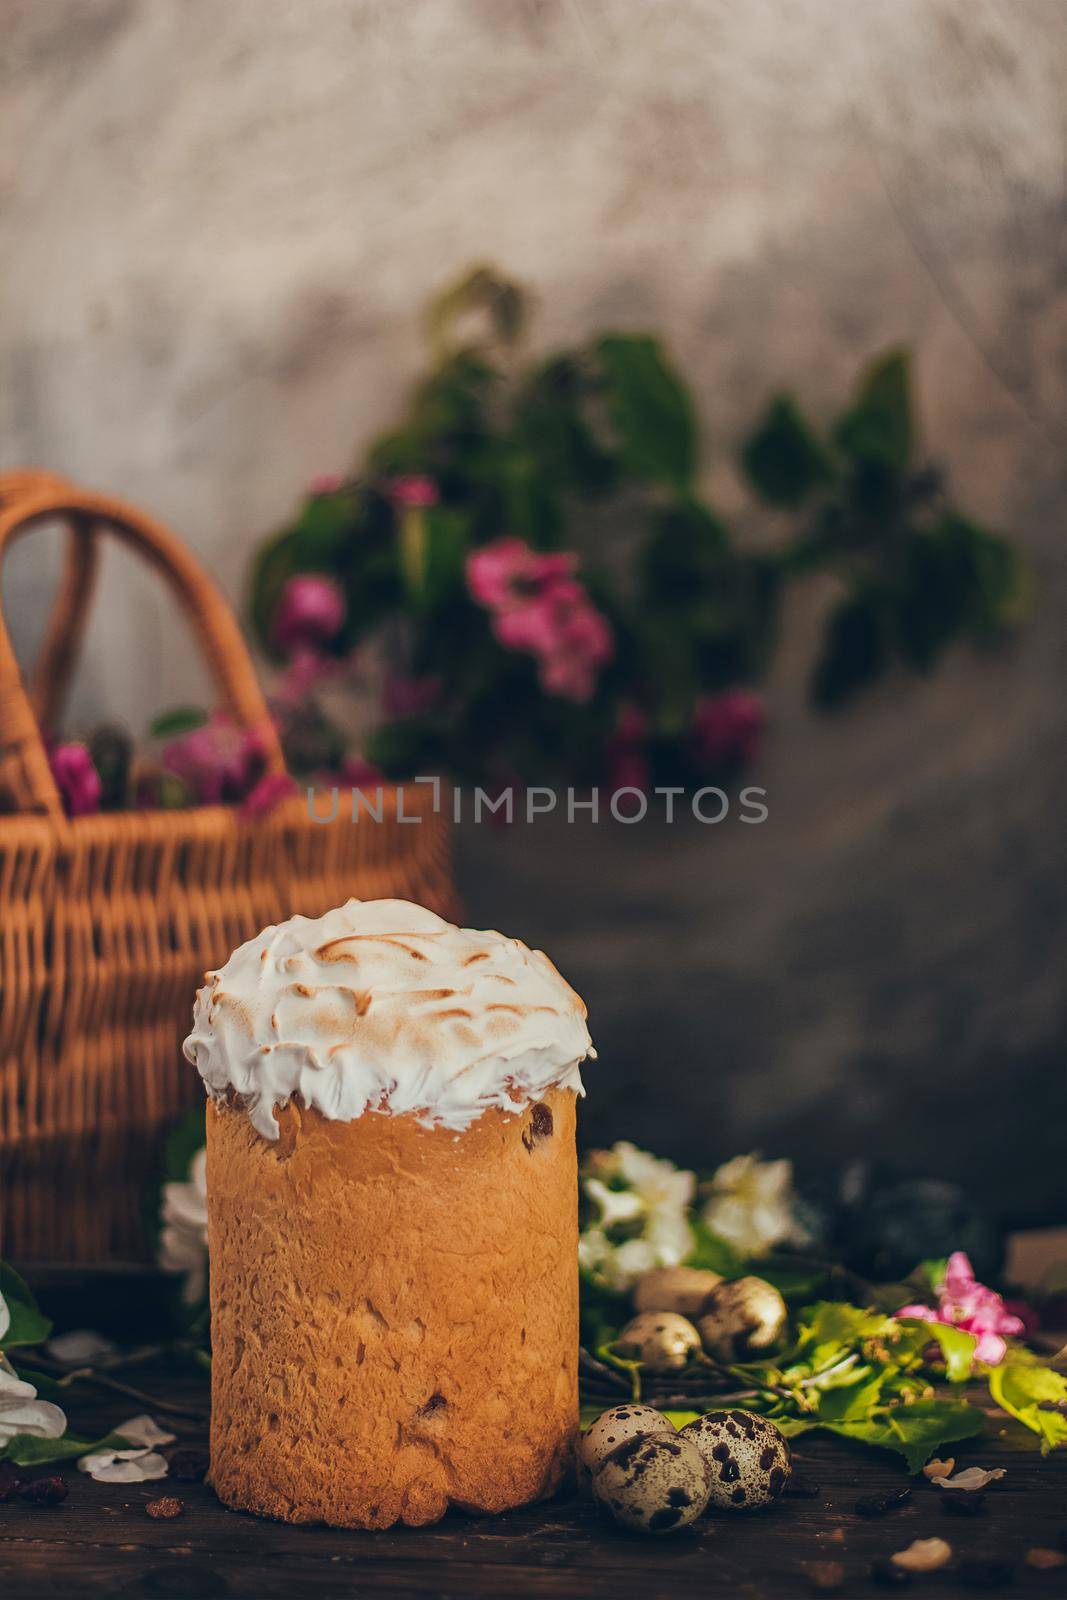 Traditional Russian Orthodox Easter bread kulich with apple blossom and colored eggs in rustic style background with a basket by mmp1206